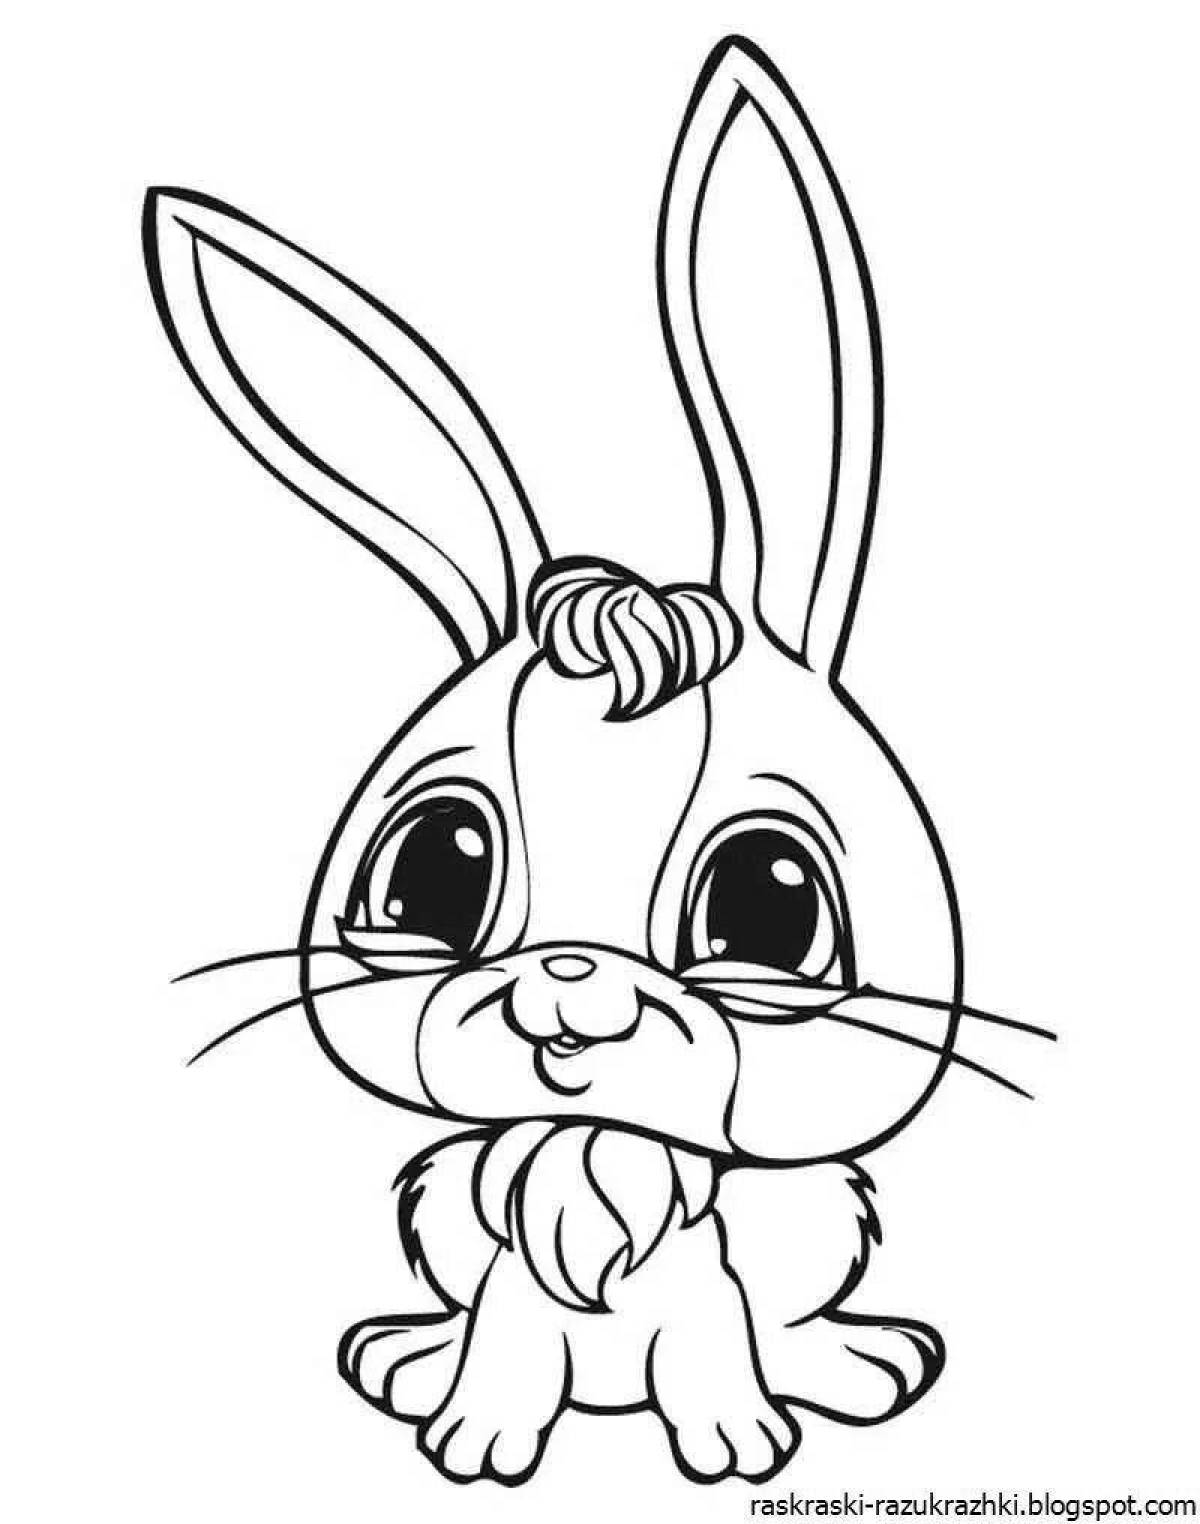 Cool bunny coloring book for kids 6-7 years old